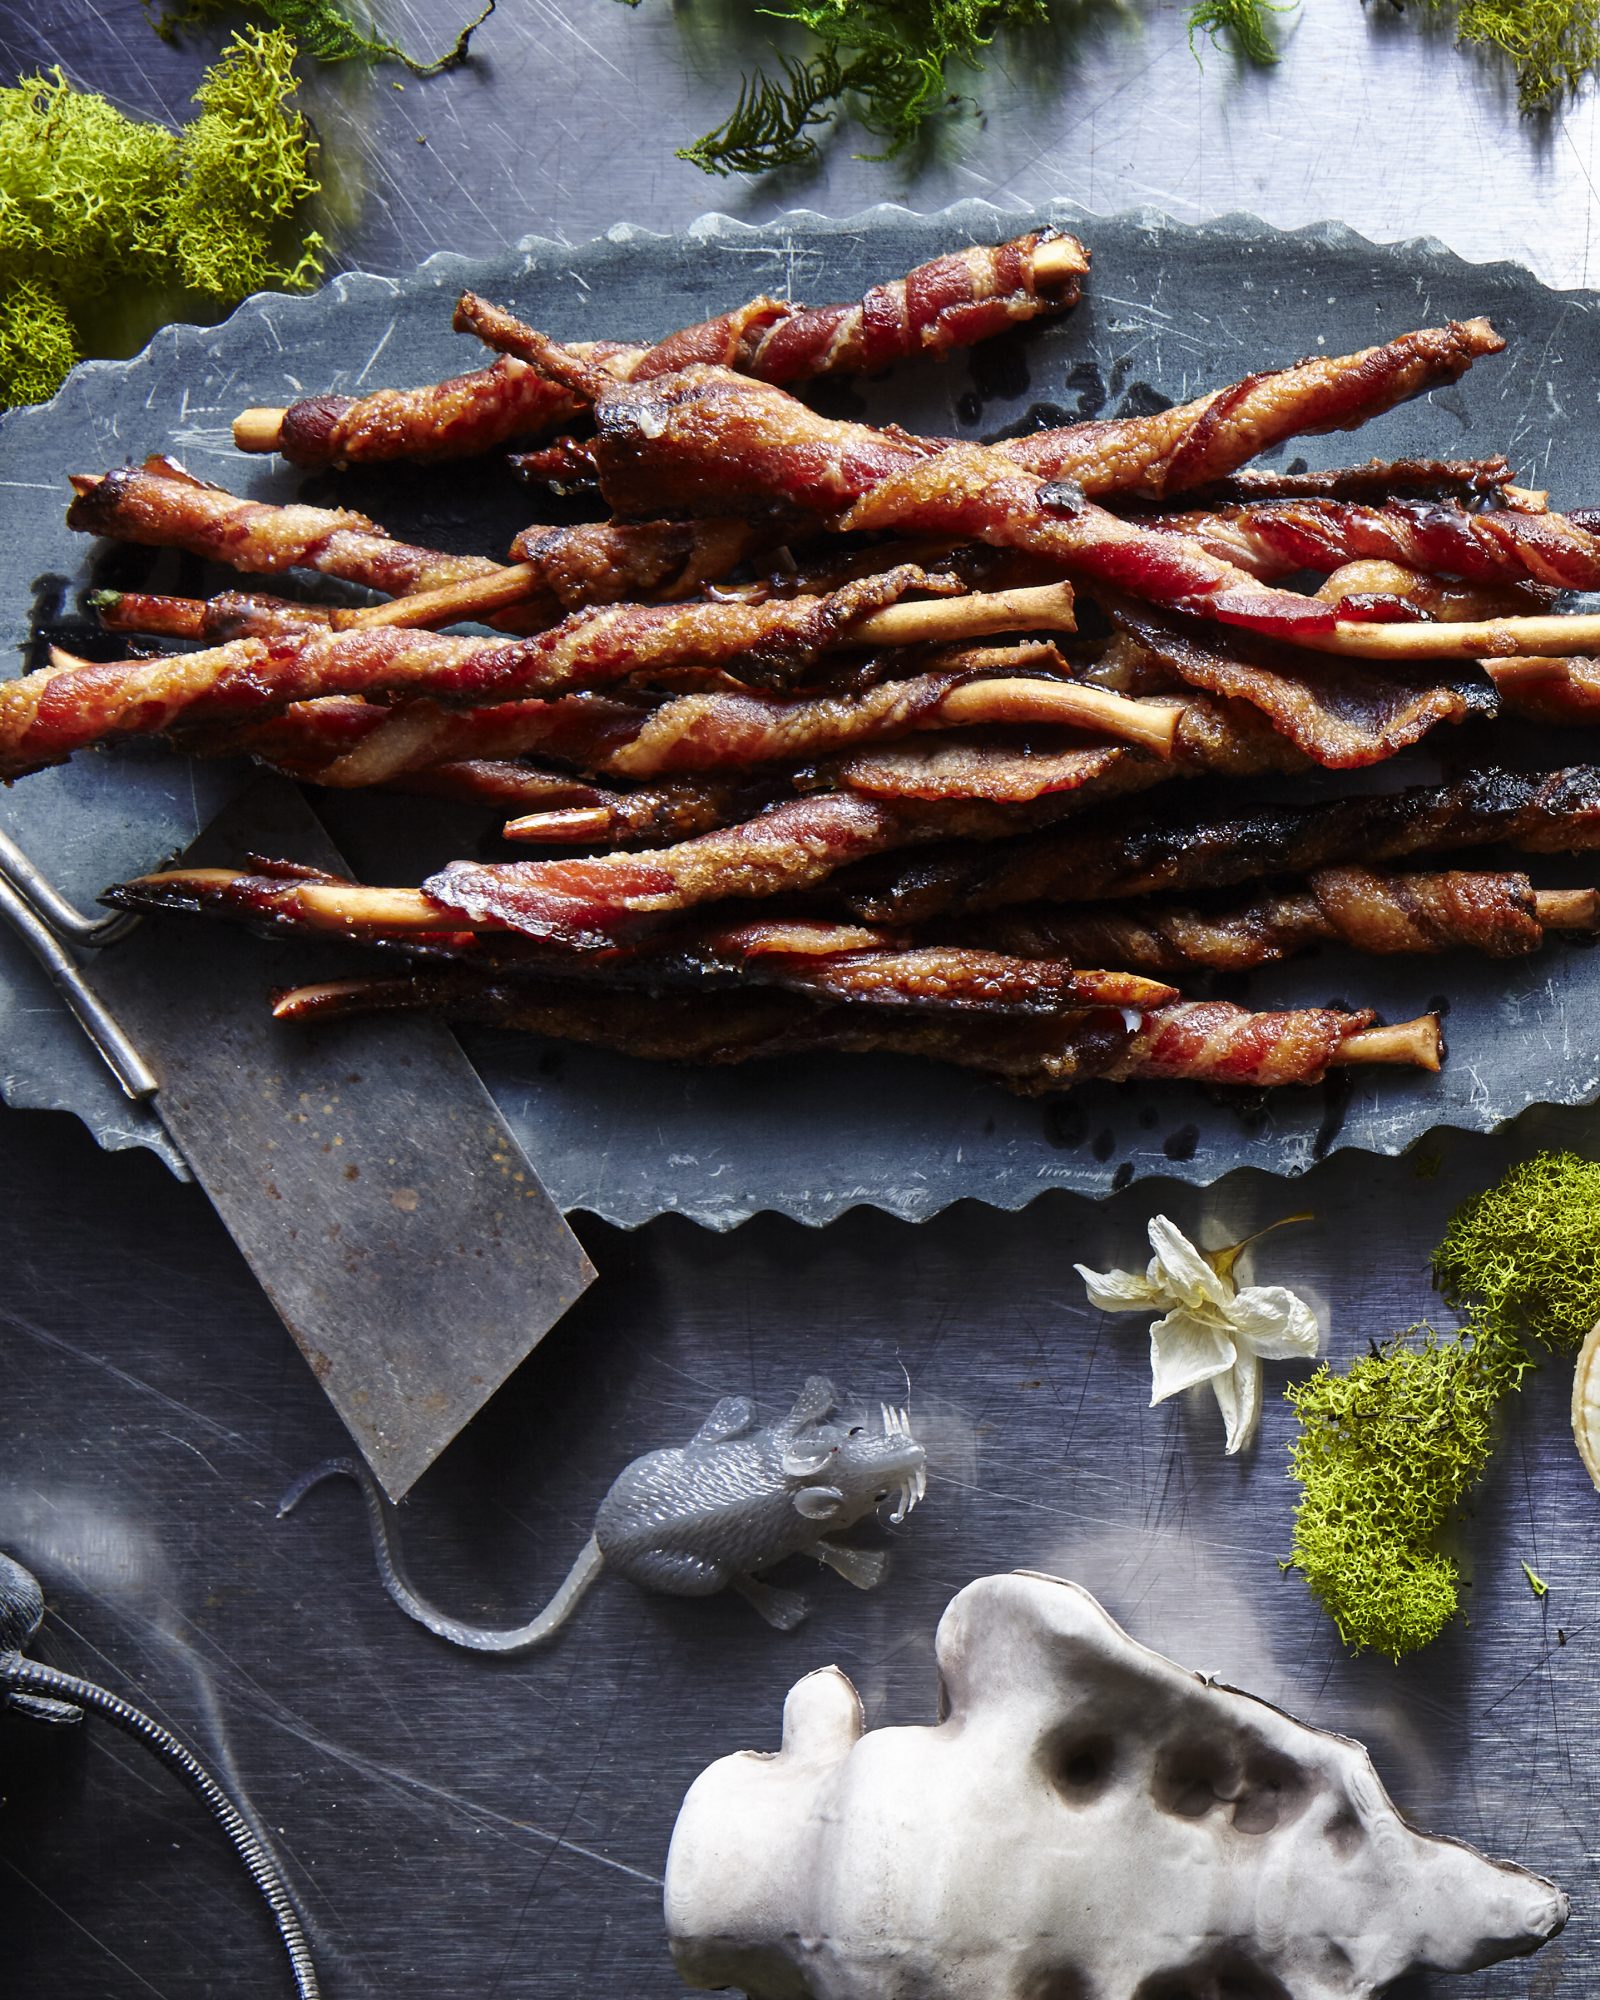 Candied Bacon Sticks with Garlic Butter Drizzle